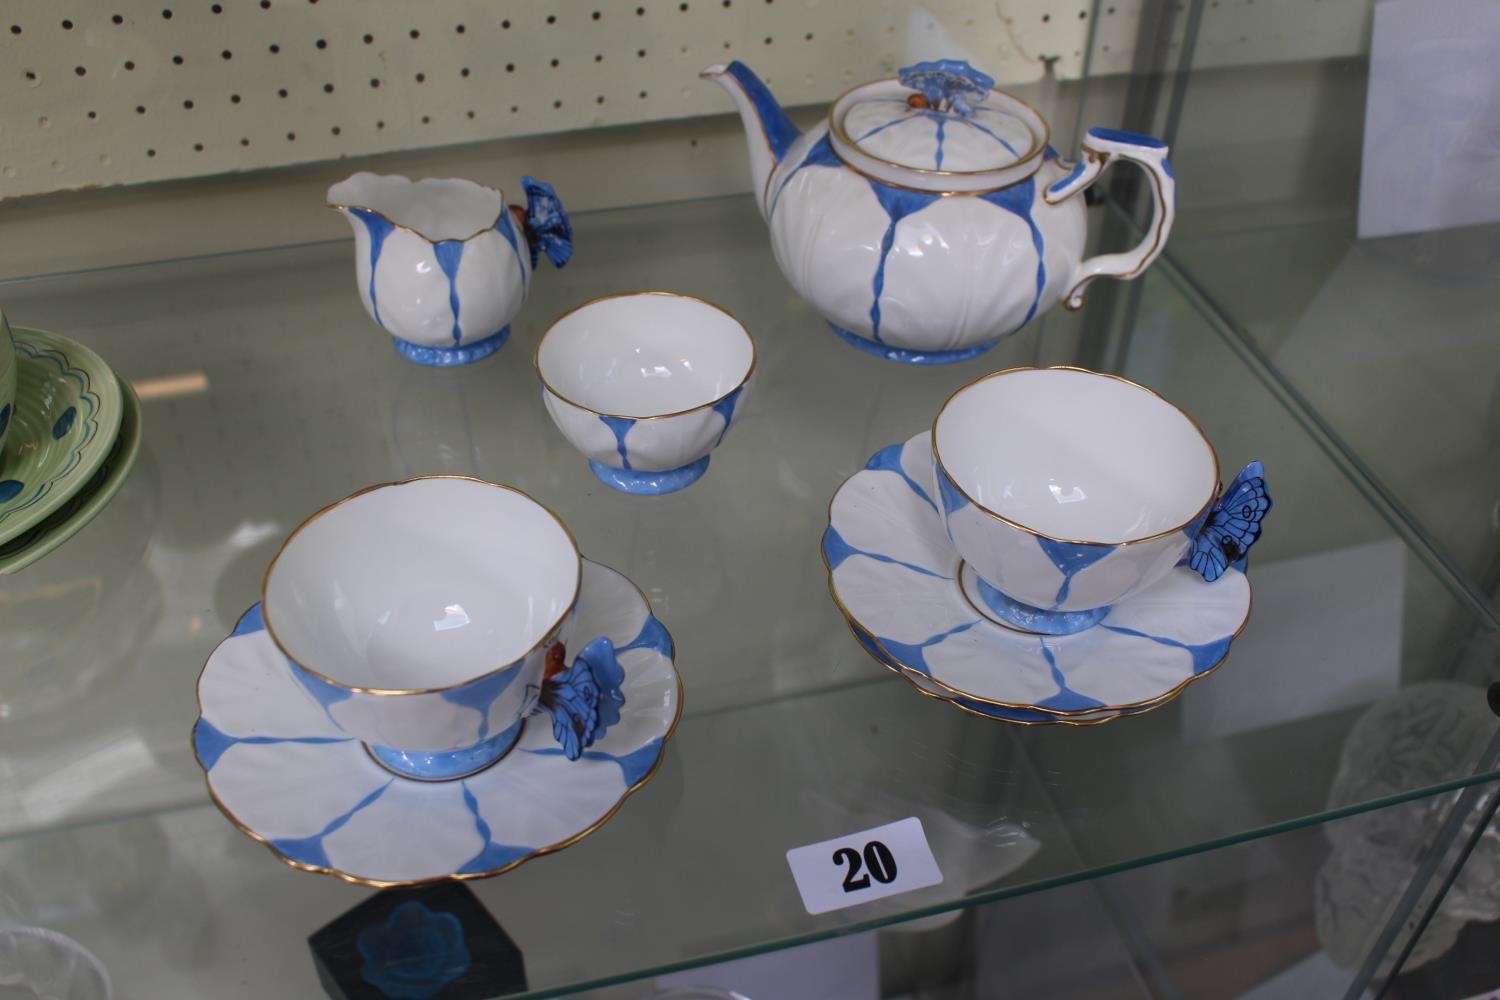 Aynsley Bone China Tea Set for 2 with stylised Blue butterfly handles, comprising of Teapot, Cream